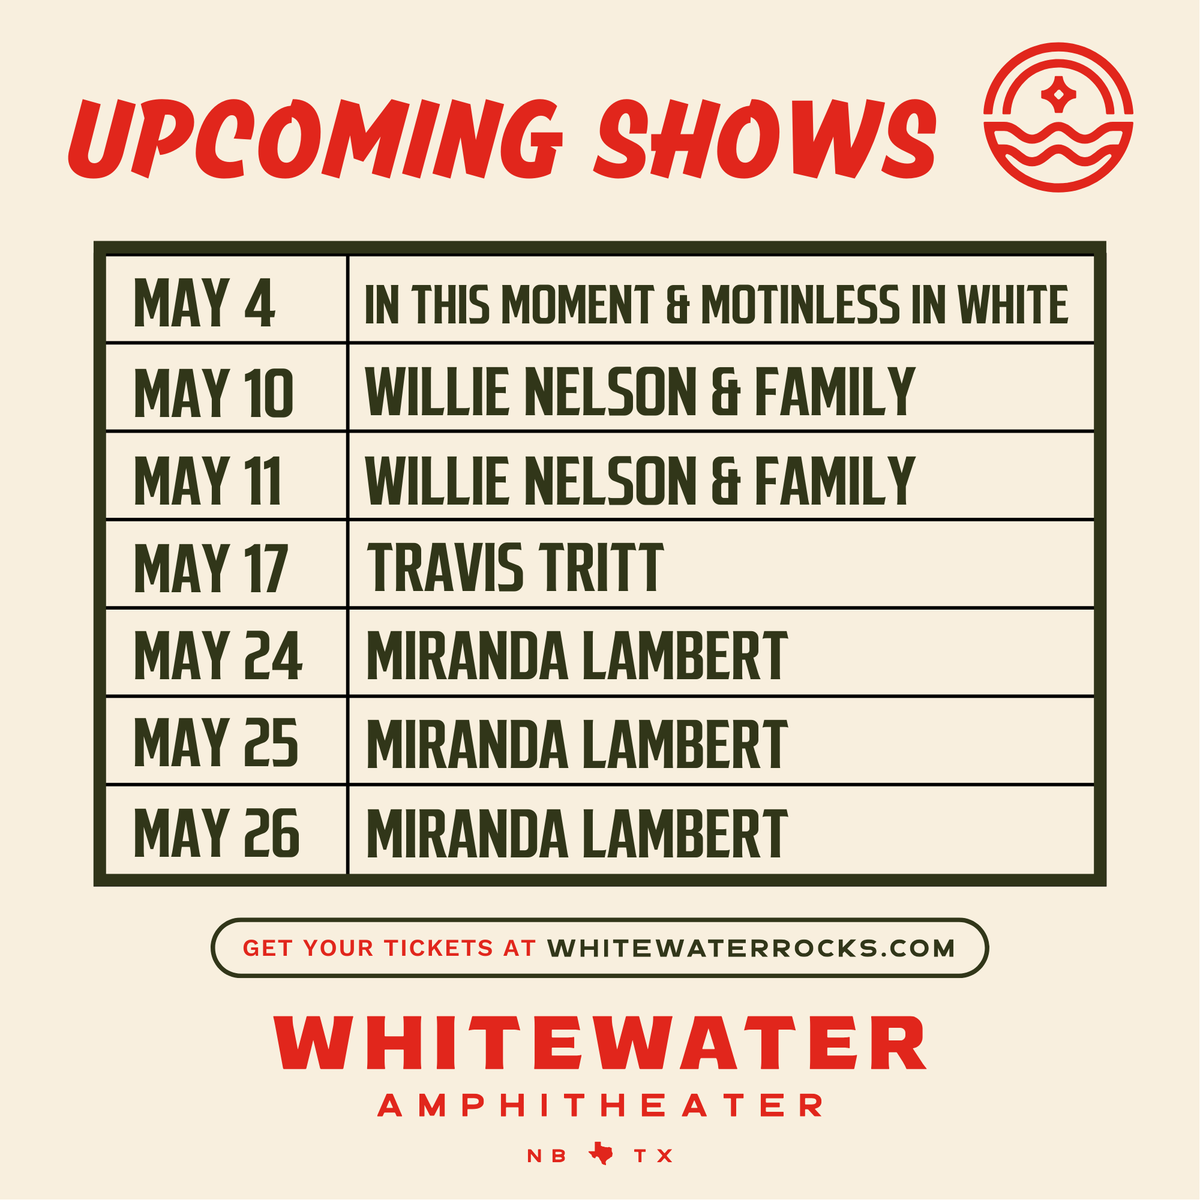 It's officially MAY!!! 🔥 We hope to see y'all at a few shows this month. Purchase tickets at whitewaterrocks.com 🎟 5/4- @OfficialITM & @MIWband 5/10 & 511 - @WillieNelson 5/17 - @Travistritt 5/24, 5/25, & 5/26 - @mirandalambert